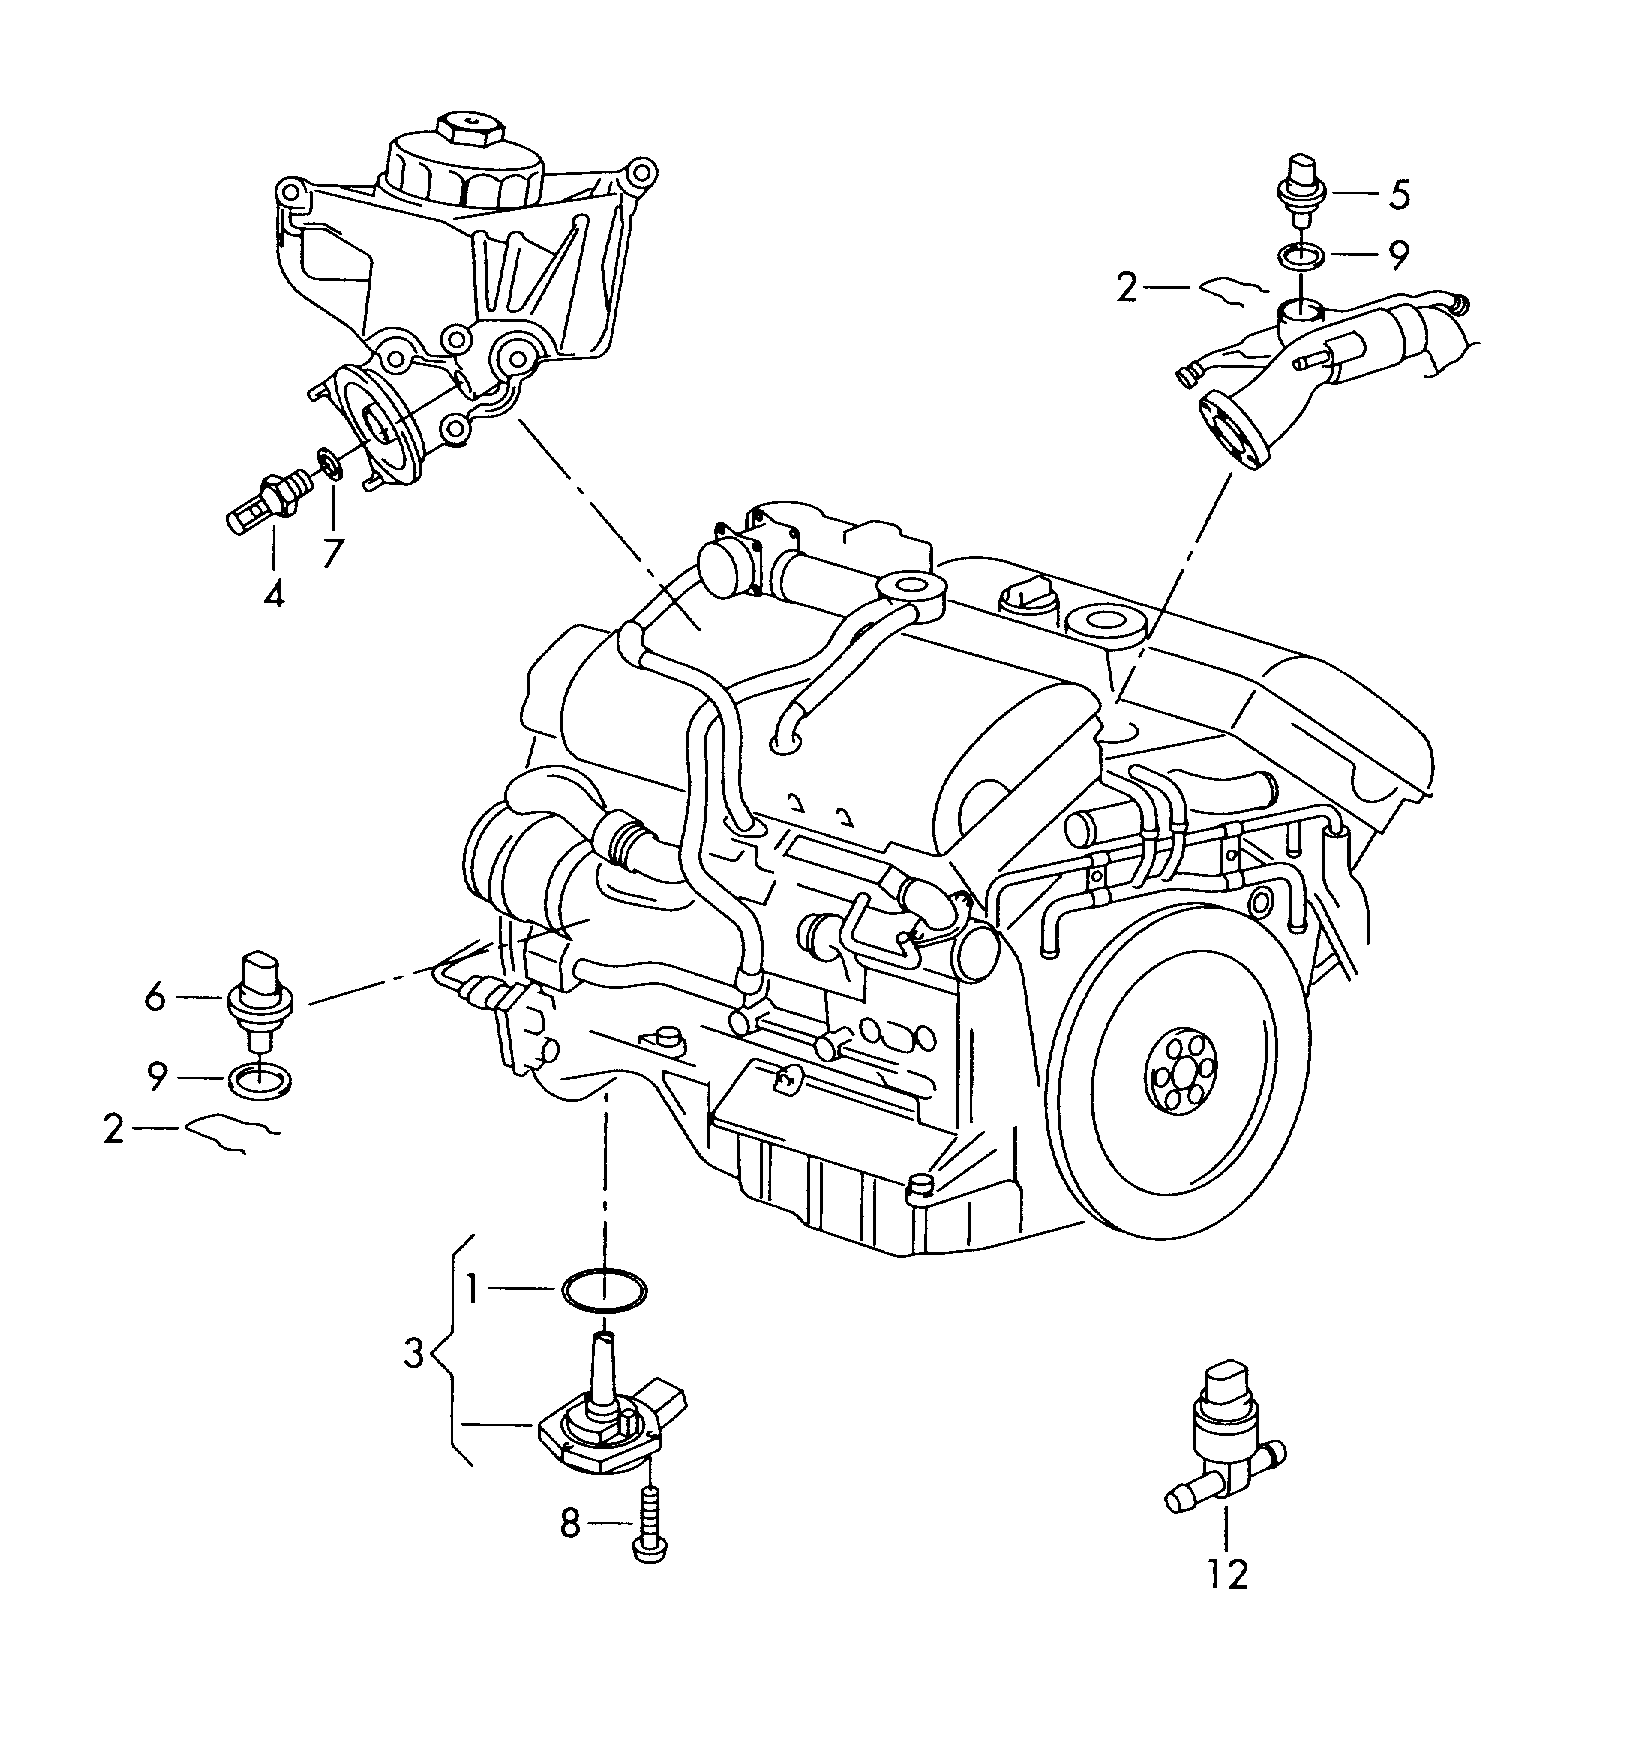 switches and senders on engine
and gearbox - Touareg(TOUA)  